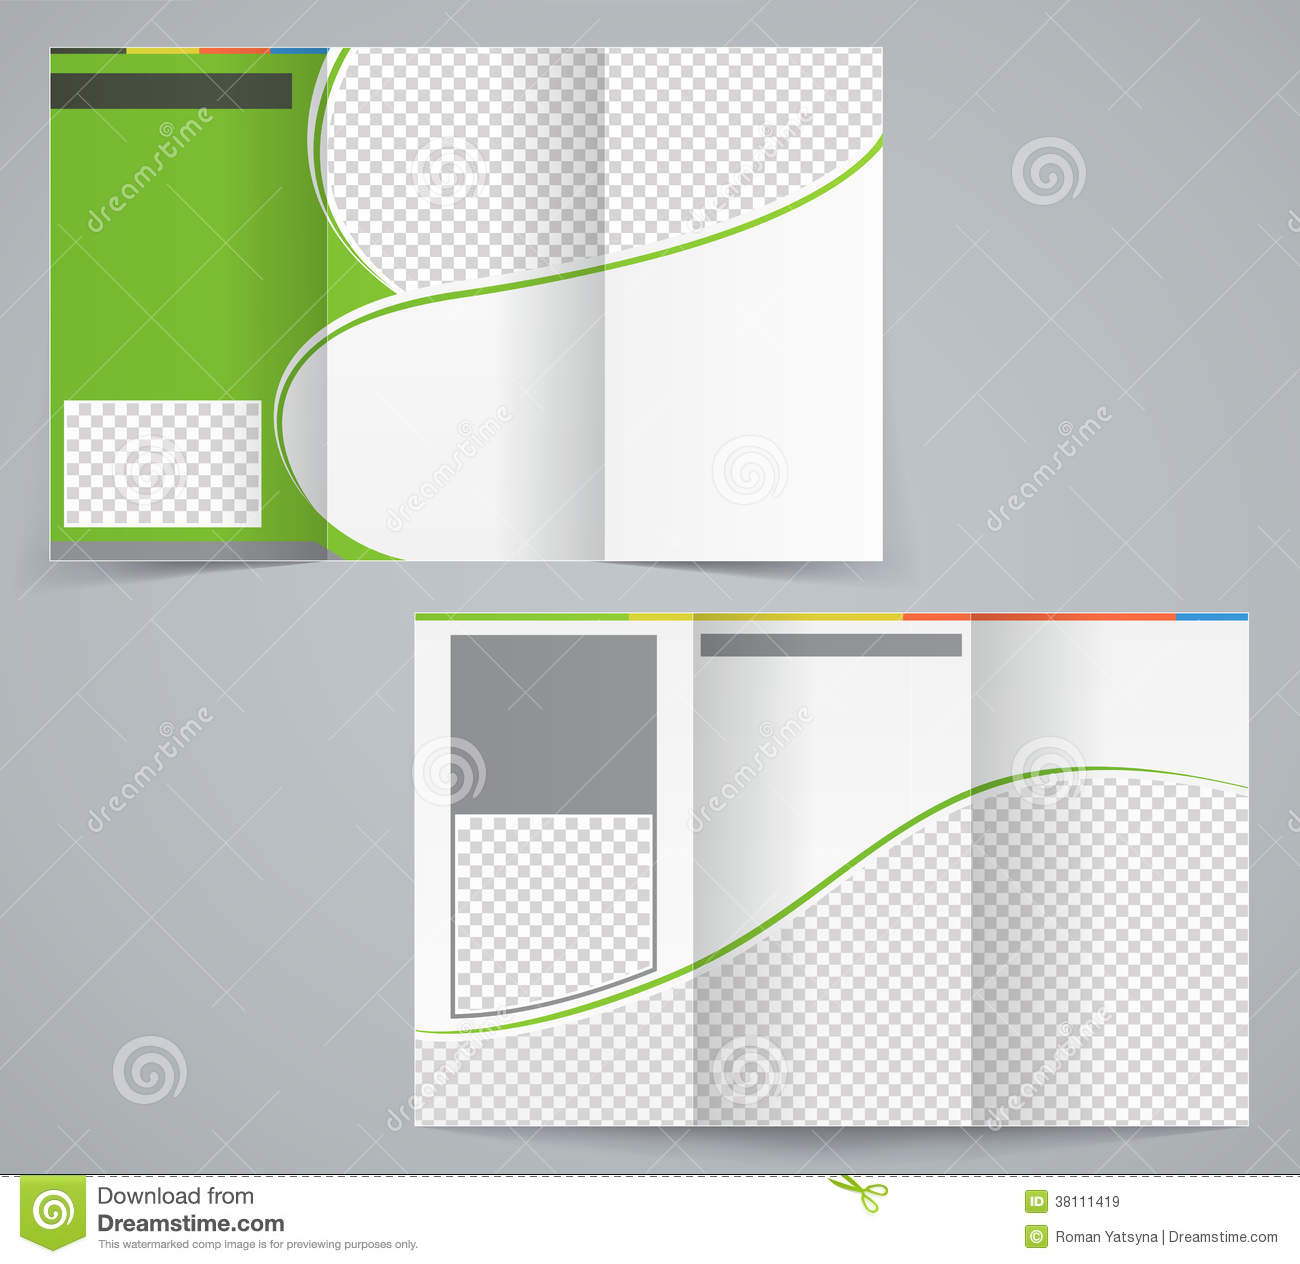 Tri Fold Business Brochure Template, Vector Green Stock Pertaining To Free Illustrator Brochure Templates Download